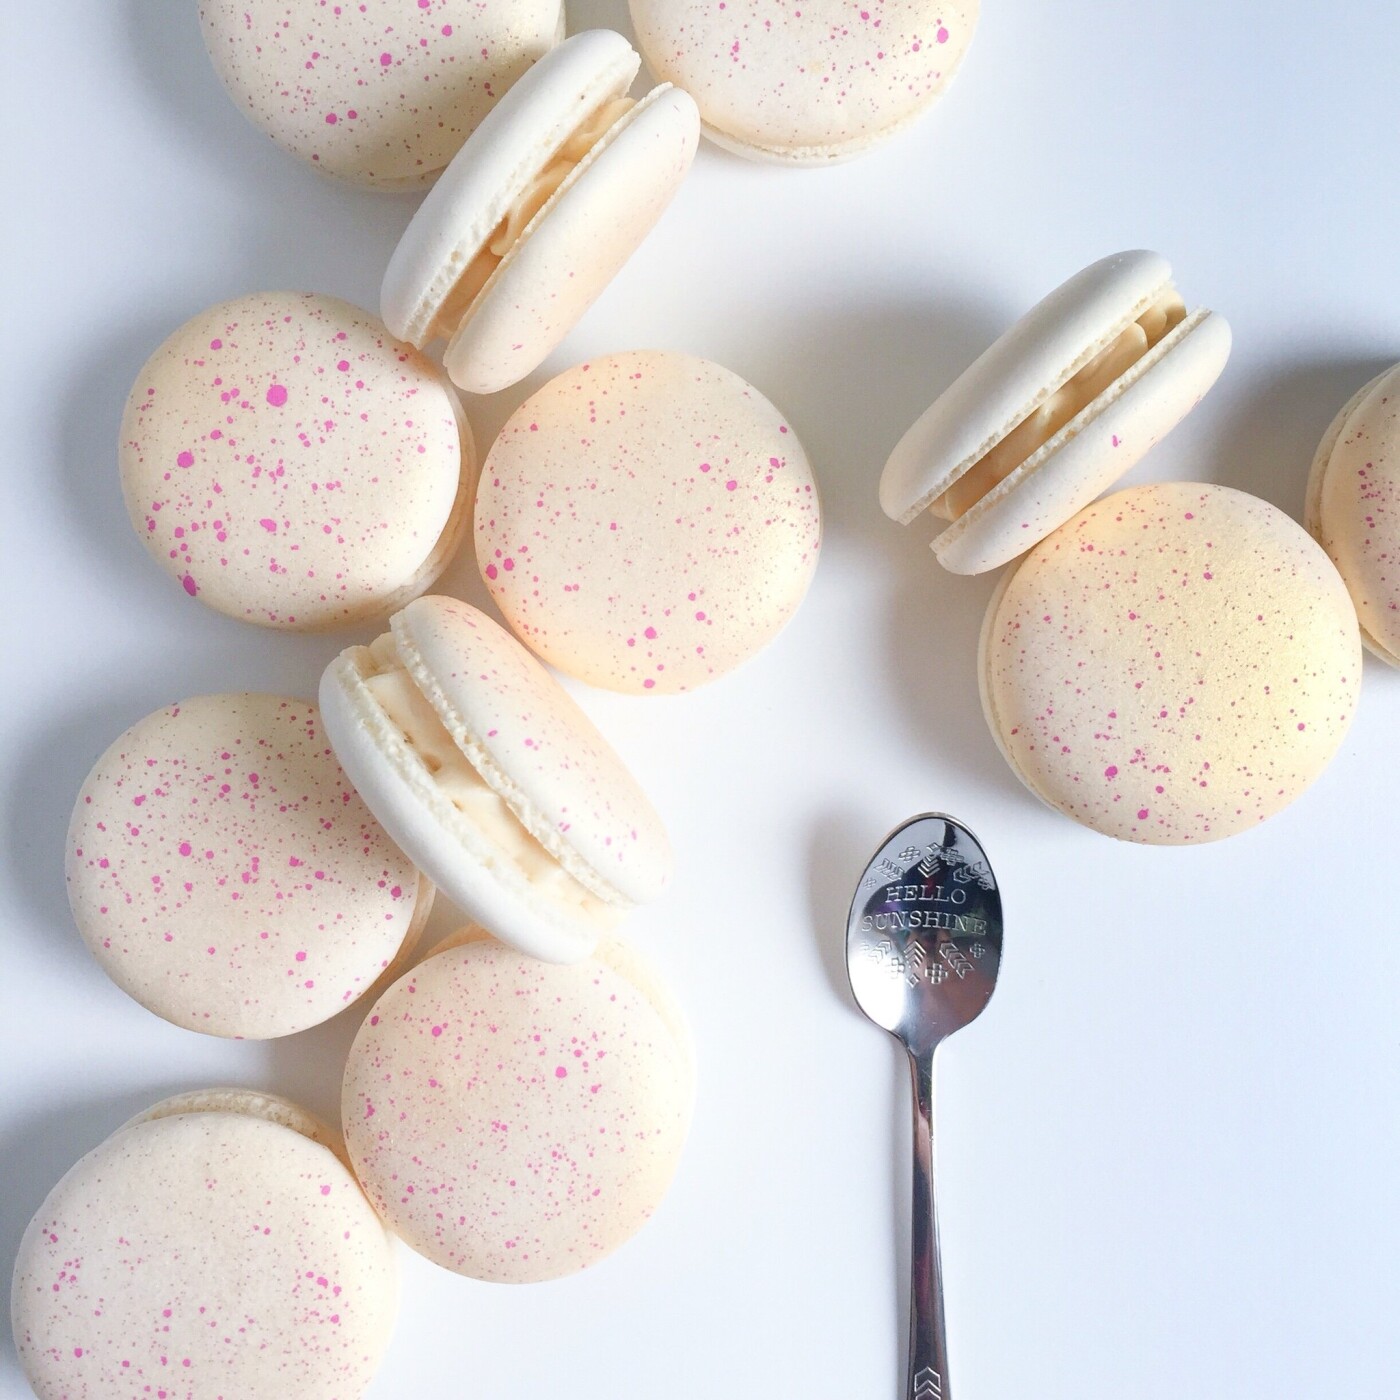 Hand painted lemon and vanilla macarons with gold and pink for a babyshower. That spoon is one of my favorite photography props!